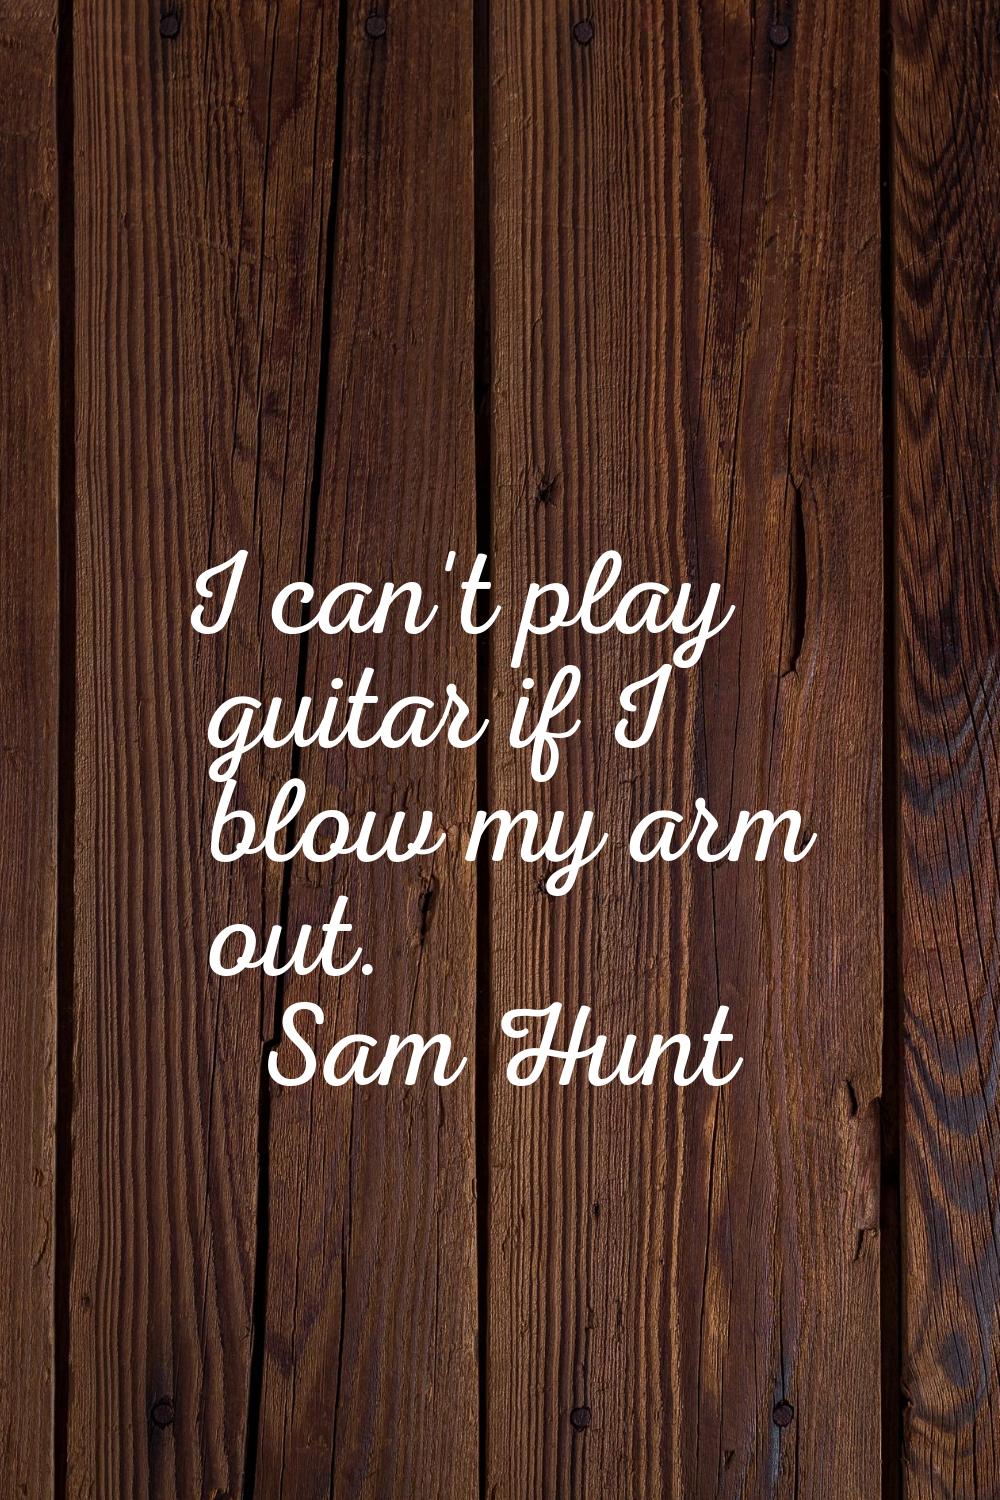 I can't play guitar if I blow my arm out.